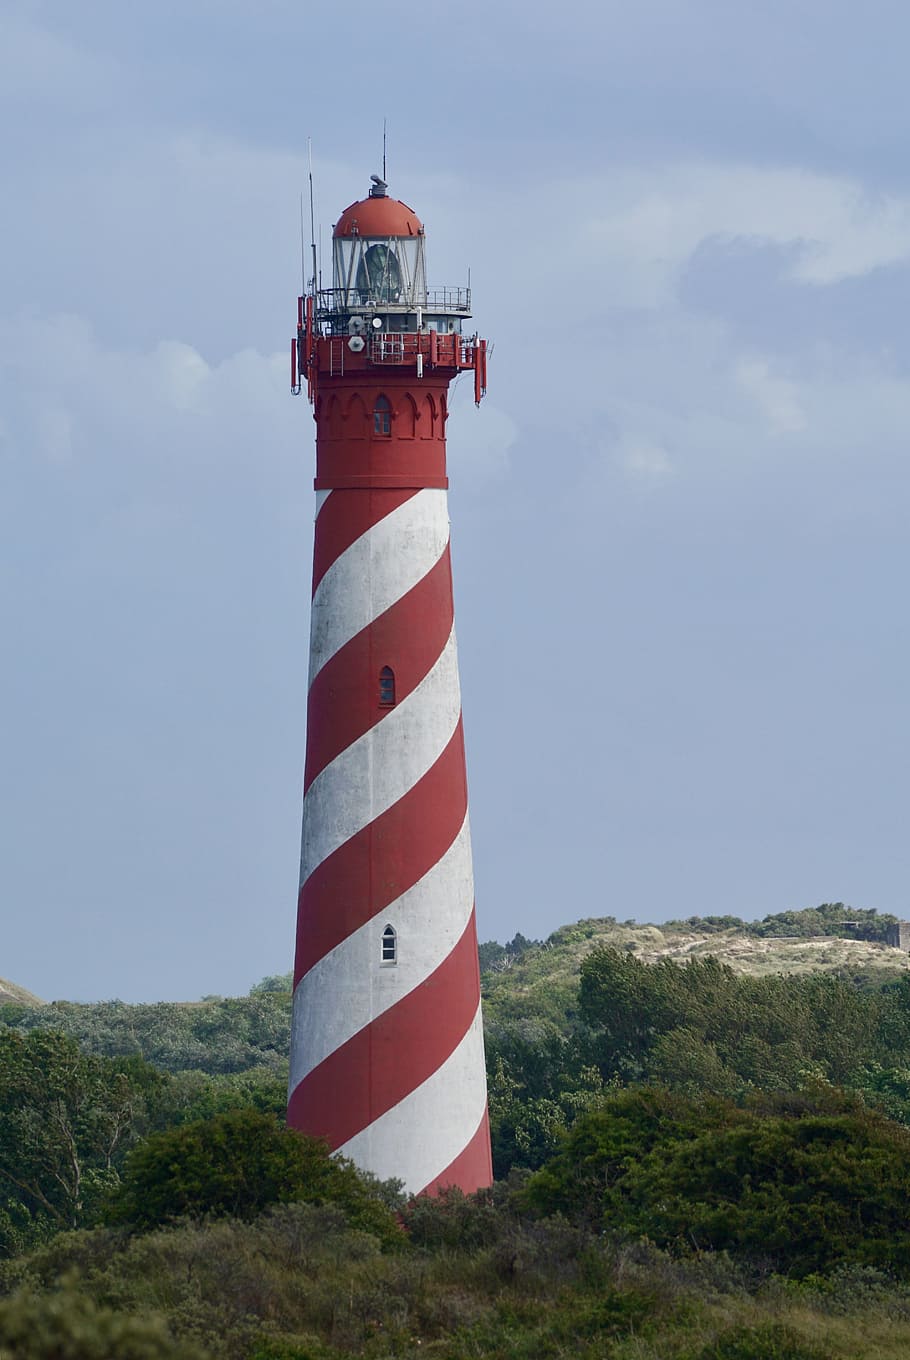 Lighthouse, Duin, Holland, schouwse duin, low country, sky, mood, atmospheric, red white, beacon